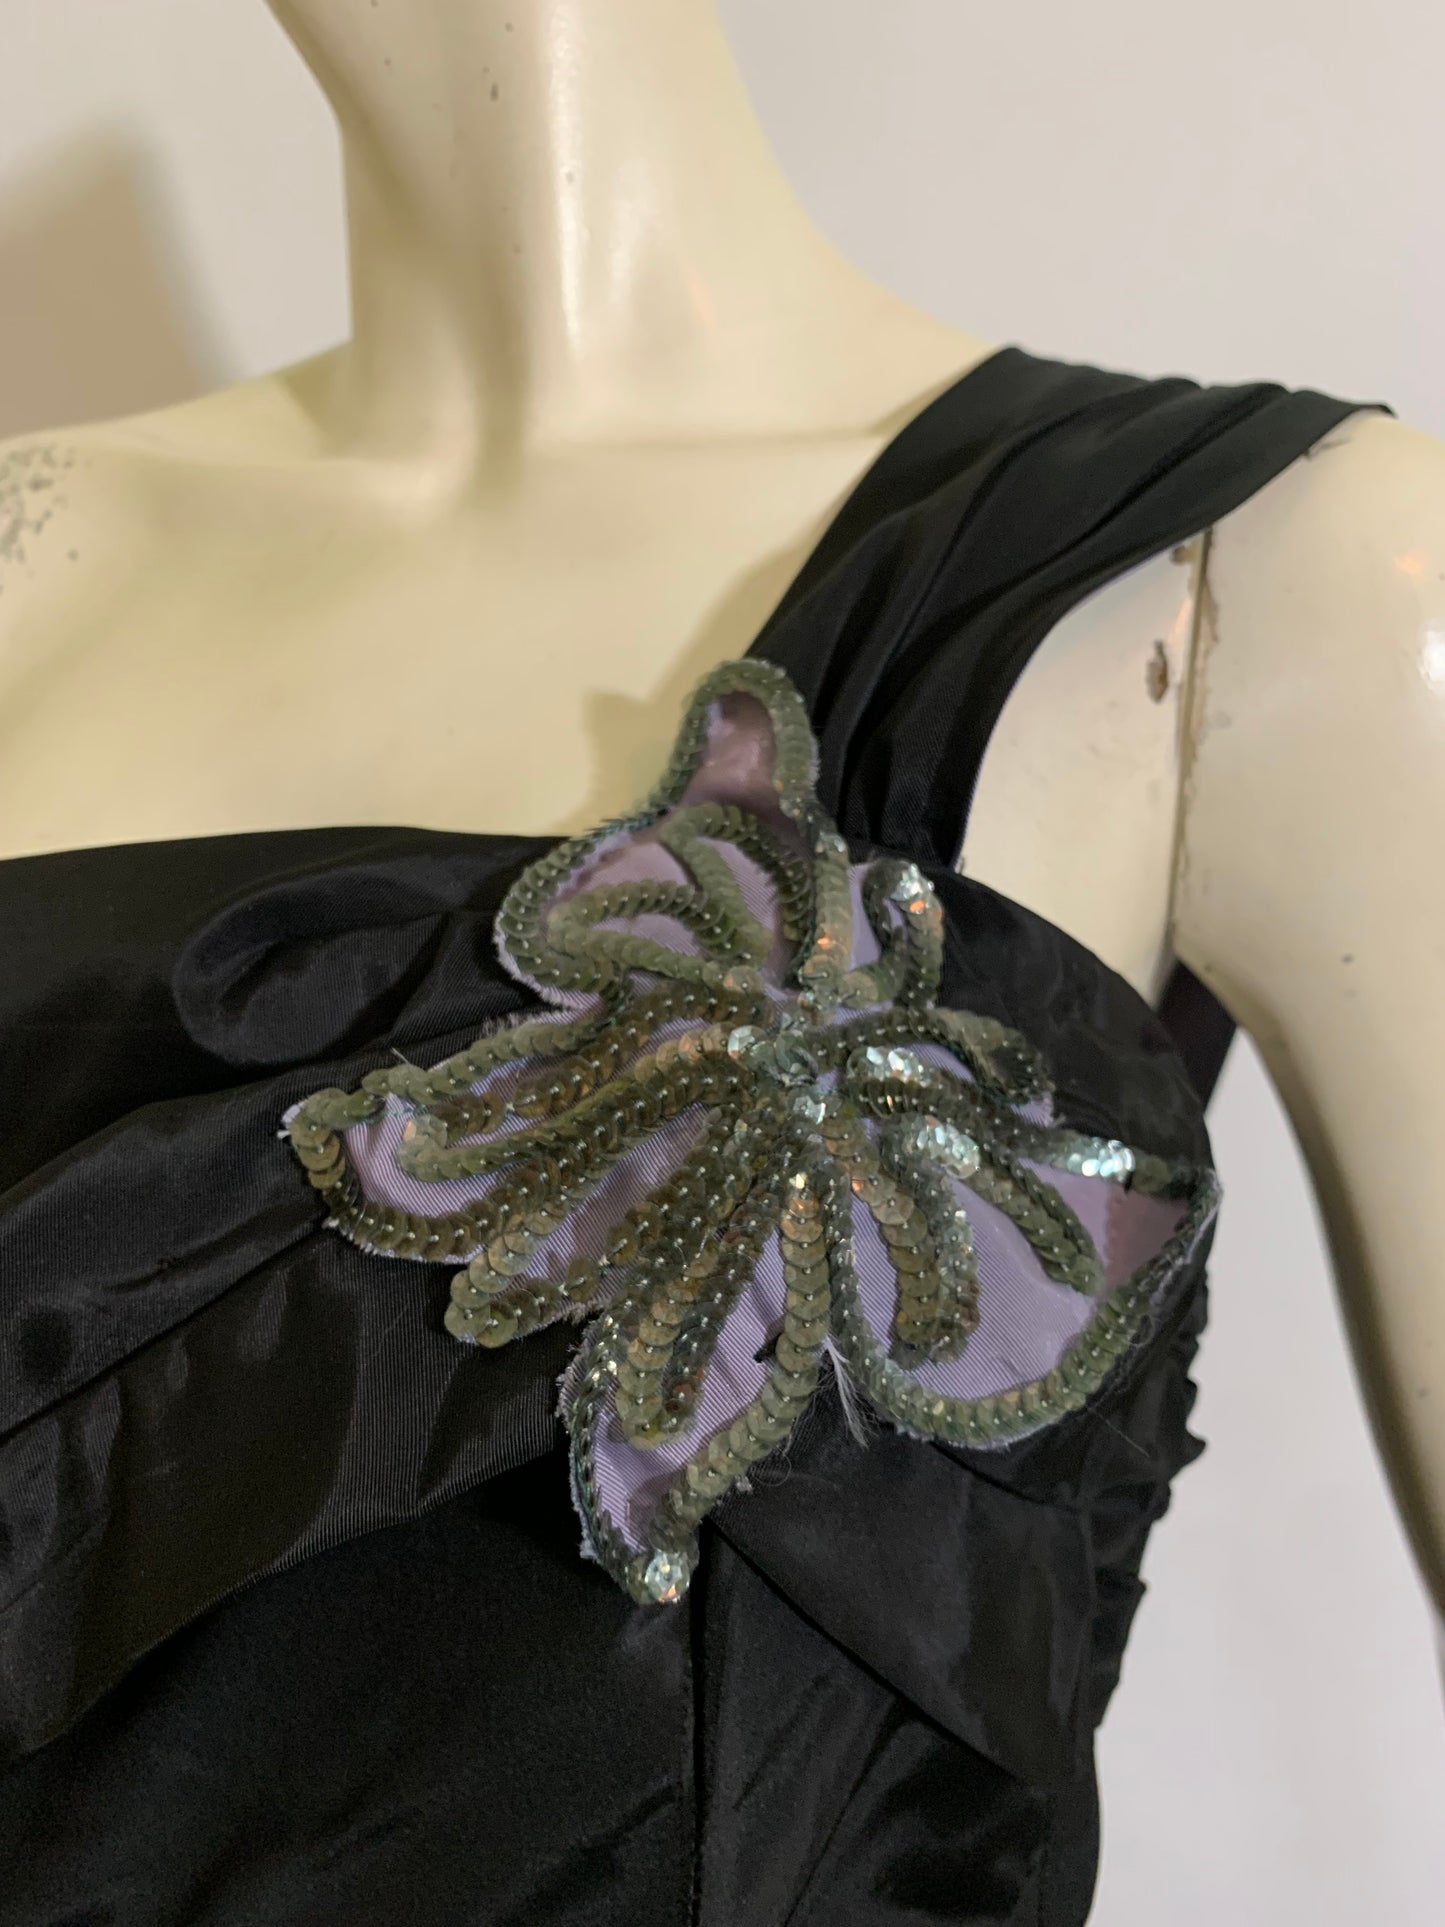 One Shoulder Black Taffeta Dress with Pale Blue Sequined Butterflies and Bow Back circa 1940s